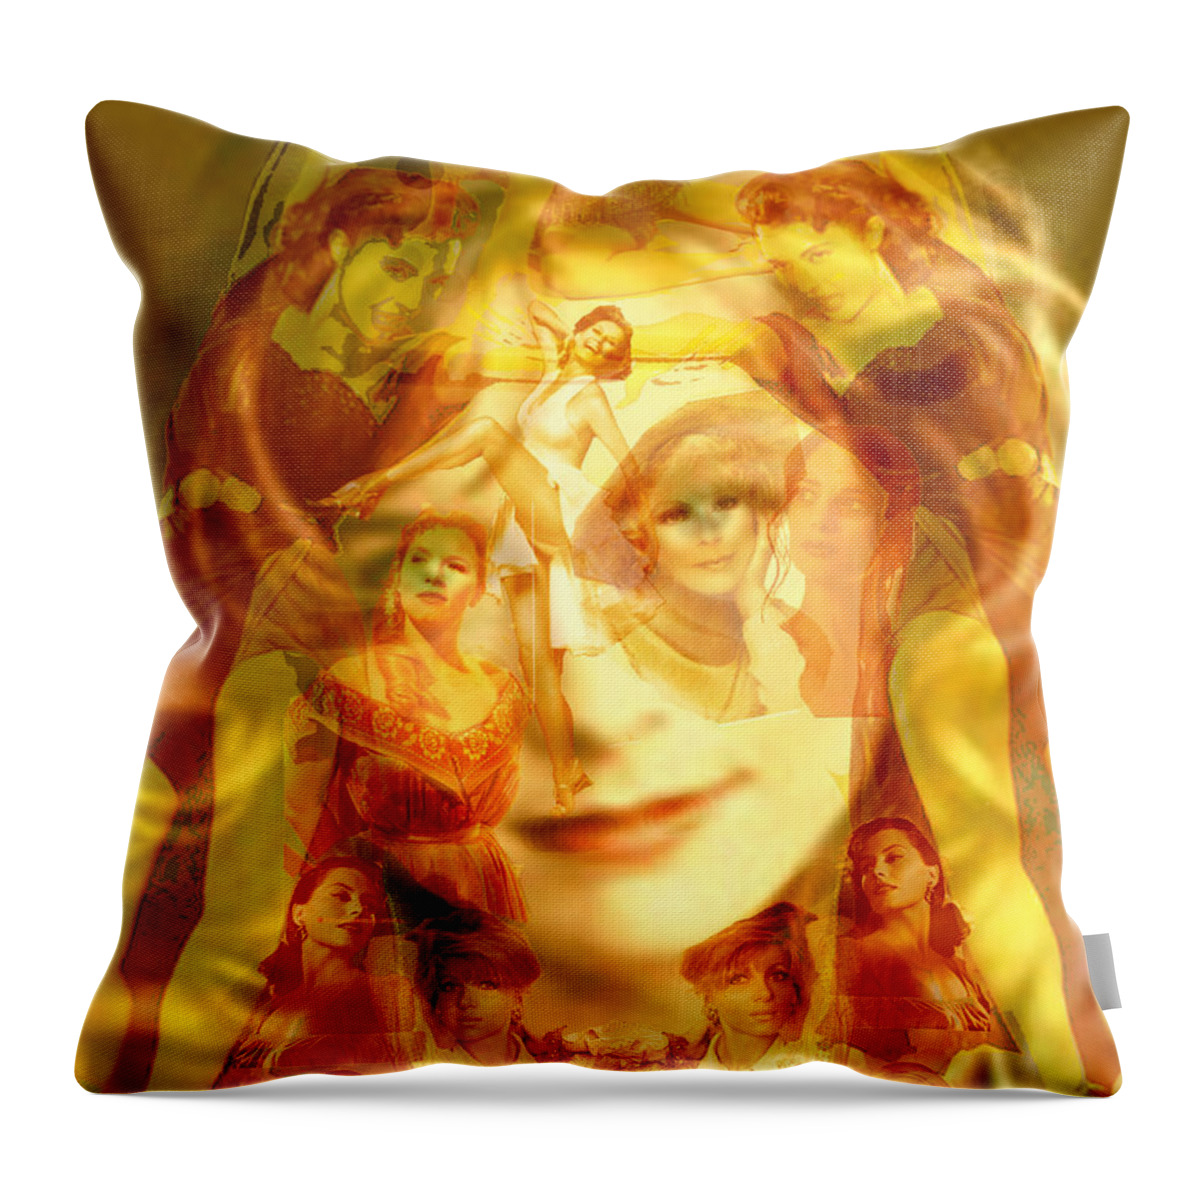 Sum Of All Desires Throw Pillow featuring the digital art Sum Of All Desires by Seth Weaver